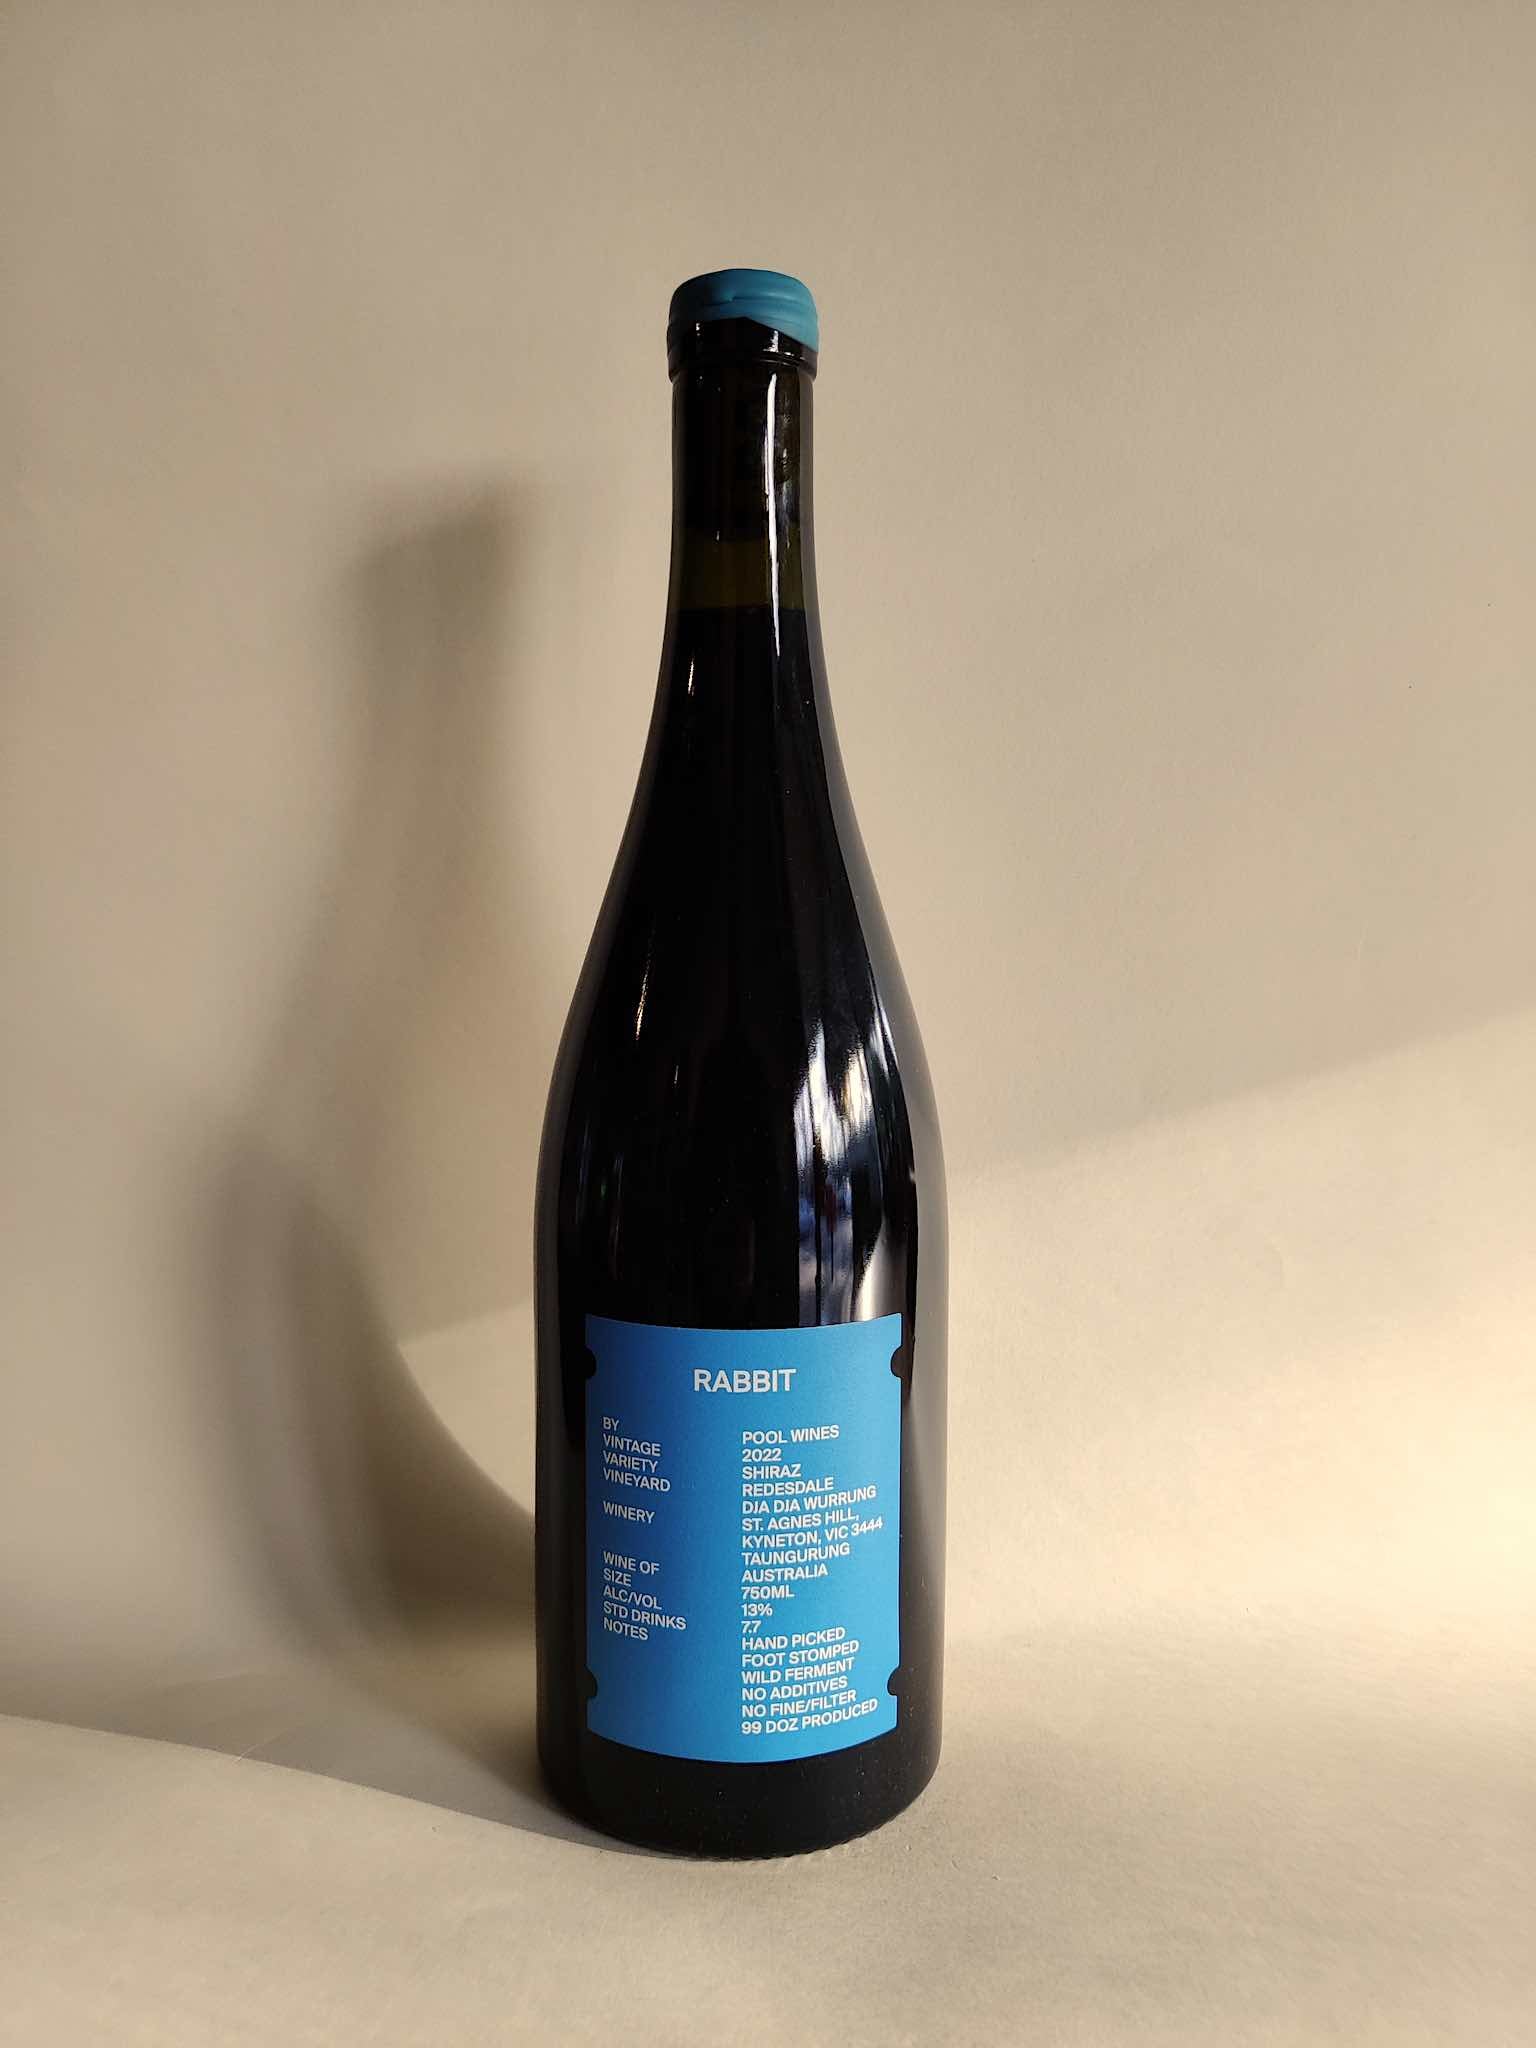 A bottle of Pool Wines Rabbit Shiraz from Central Victoria. 